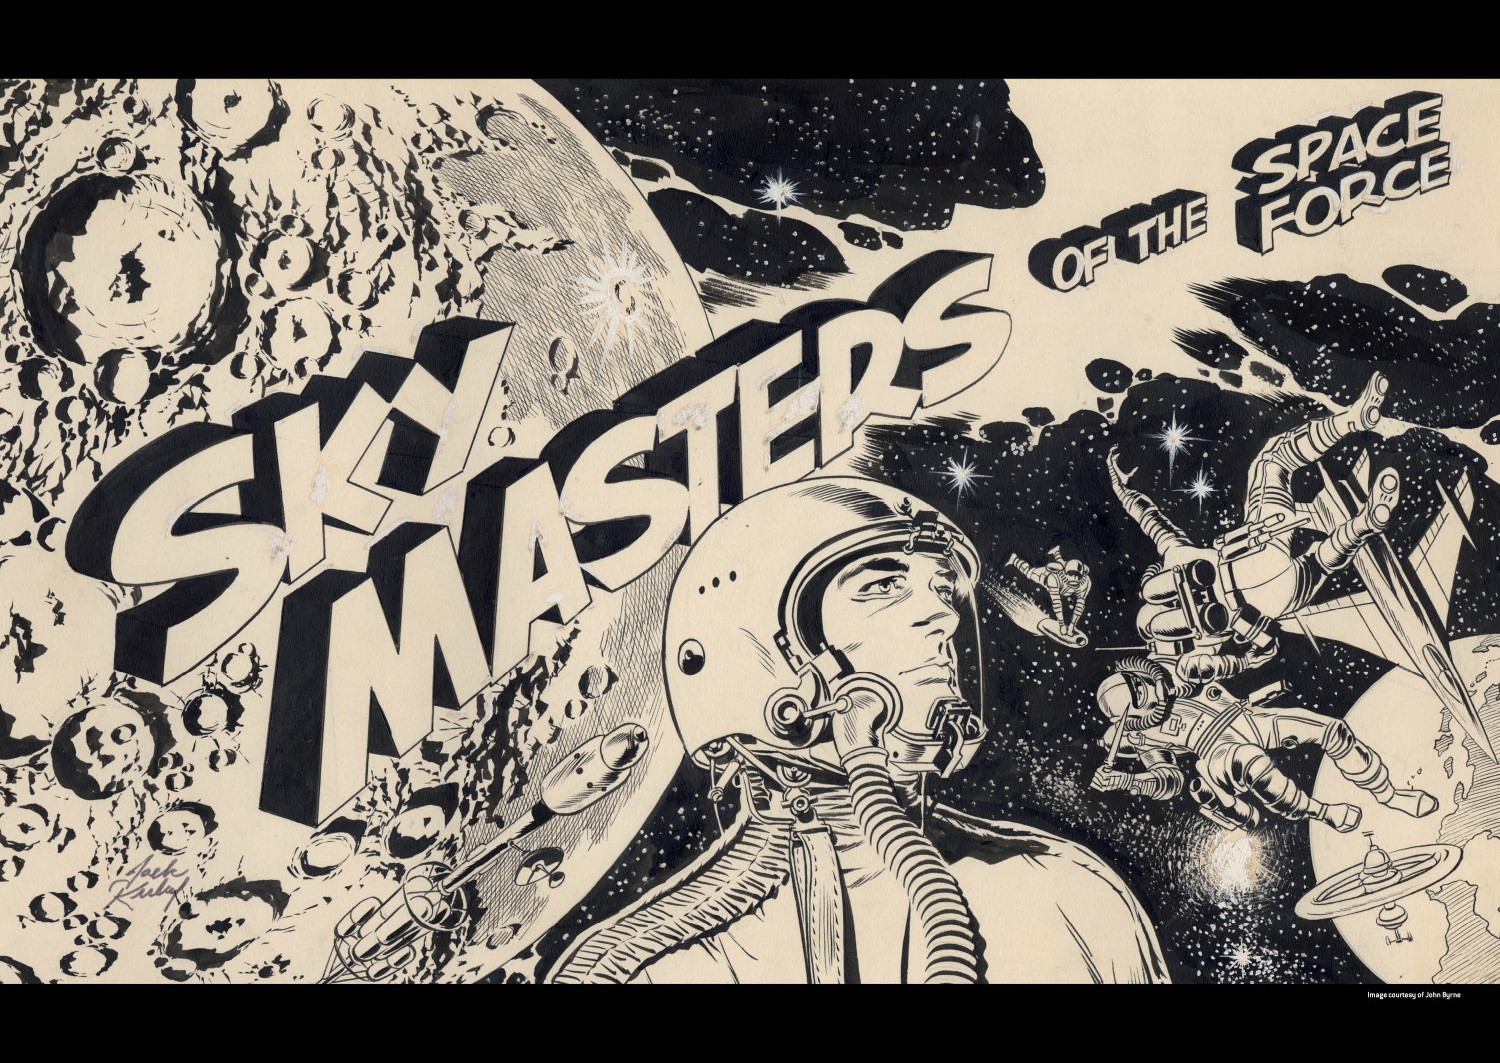 New crowdfunding campaign launches for Jack Kirby's "Sky Masters of the Space Force"